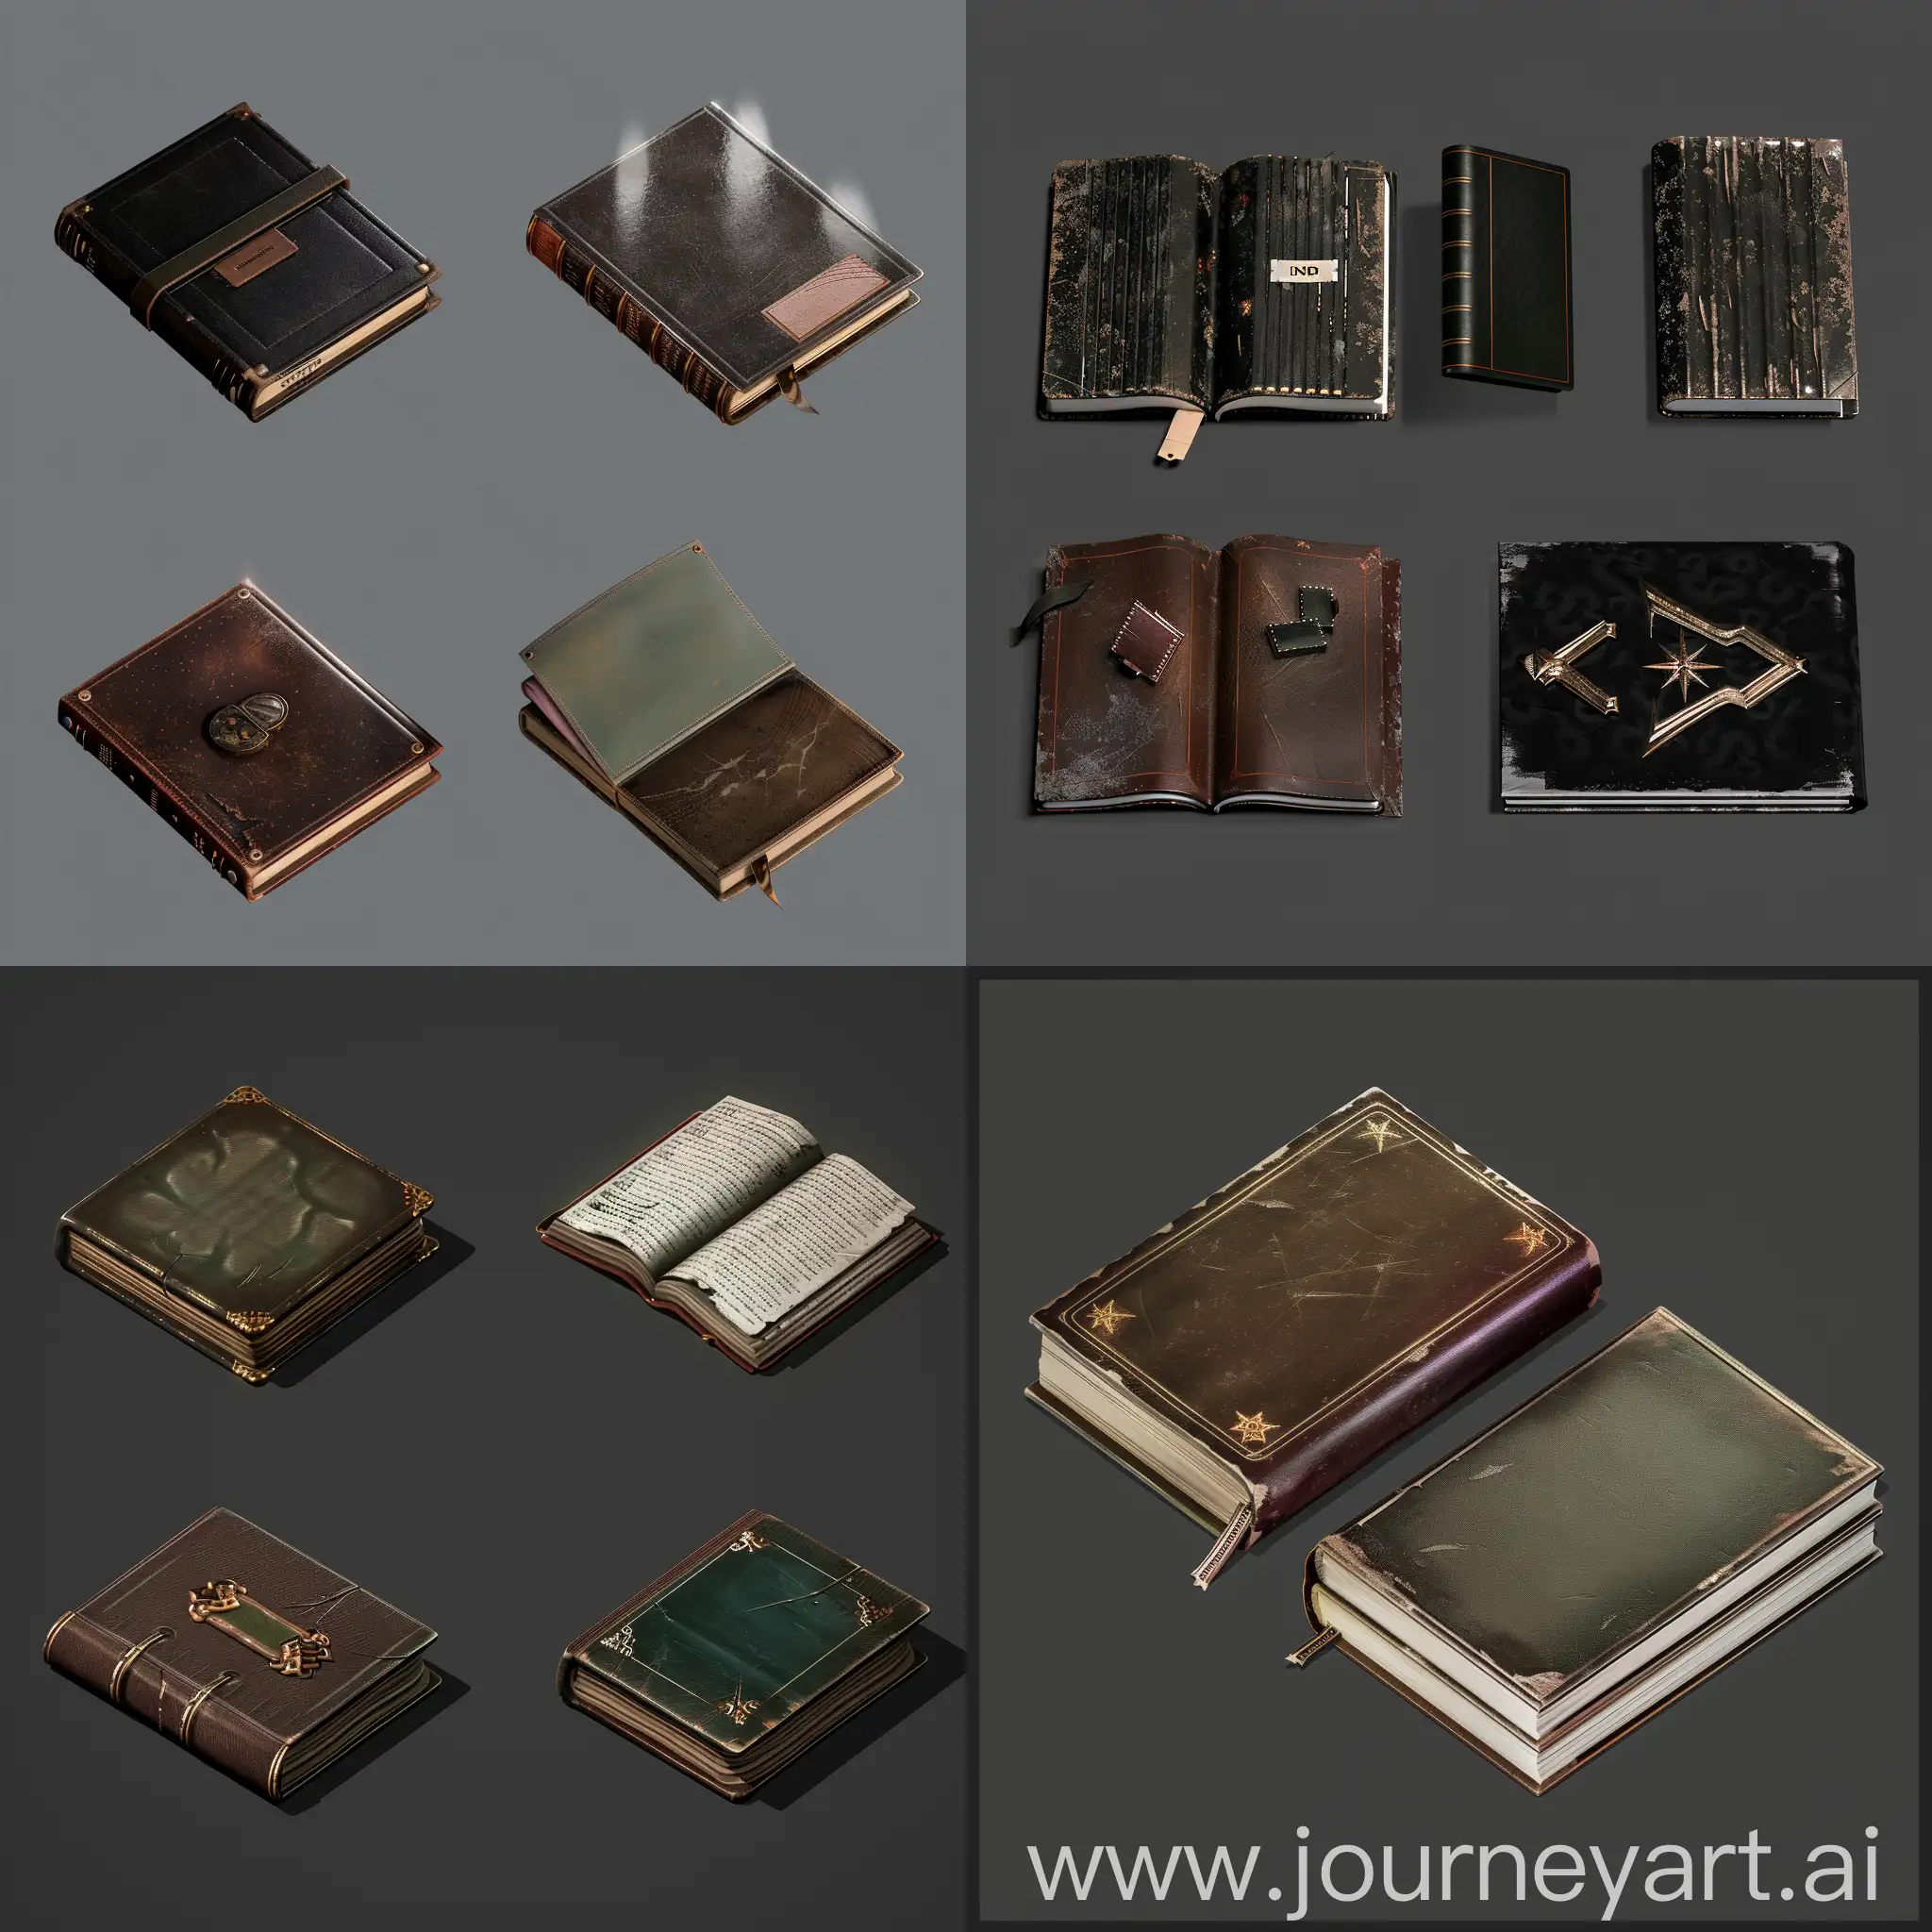 Isometric-Set-of-Old-Worn-Books-with-Shiny-Leather-Covers